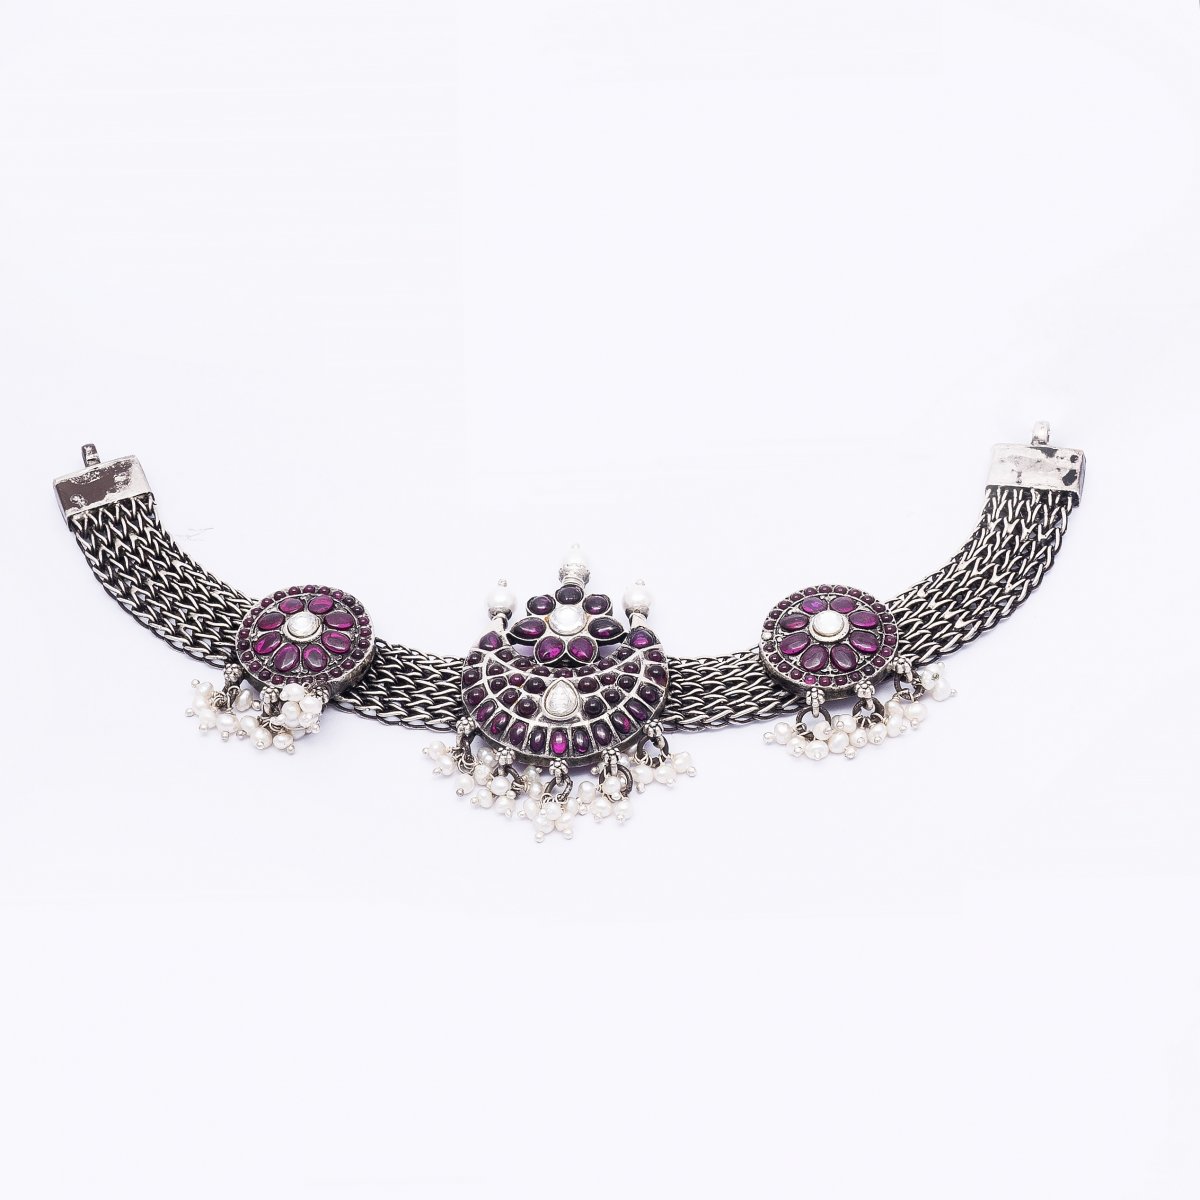 92.5 SILVER TRADITIONAL TRENDY SOUTH INDIAN NECKLACE FOR WOMEN & GIRLS